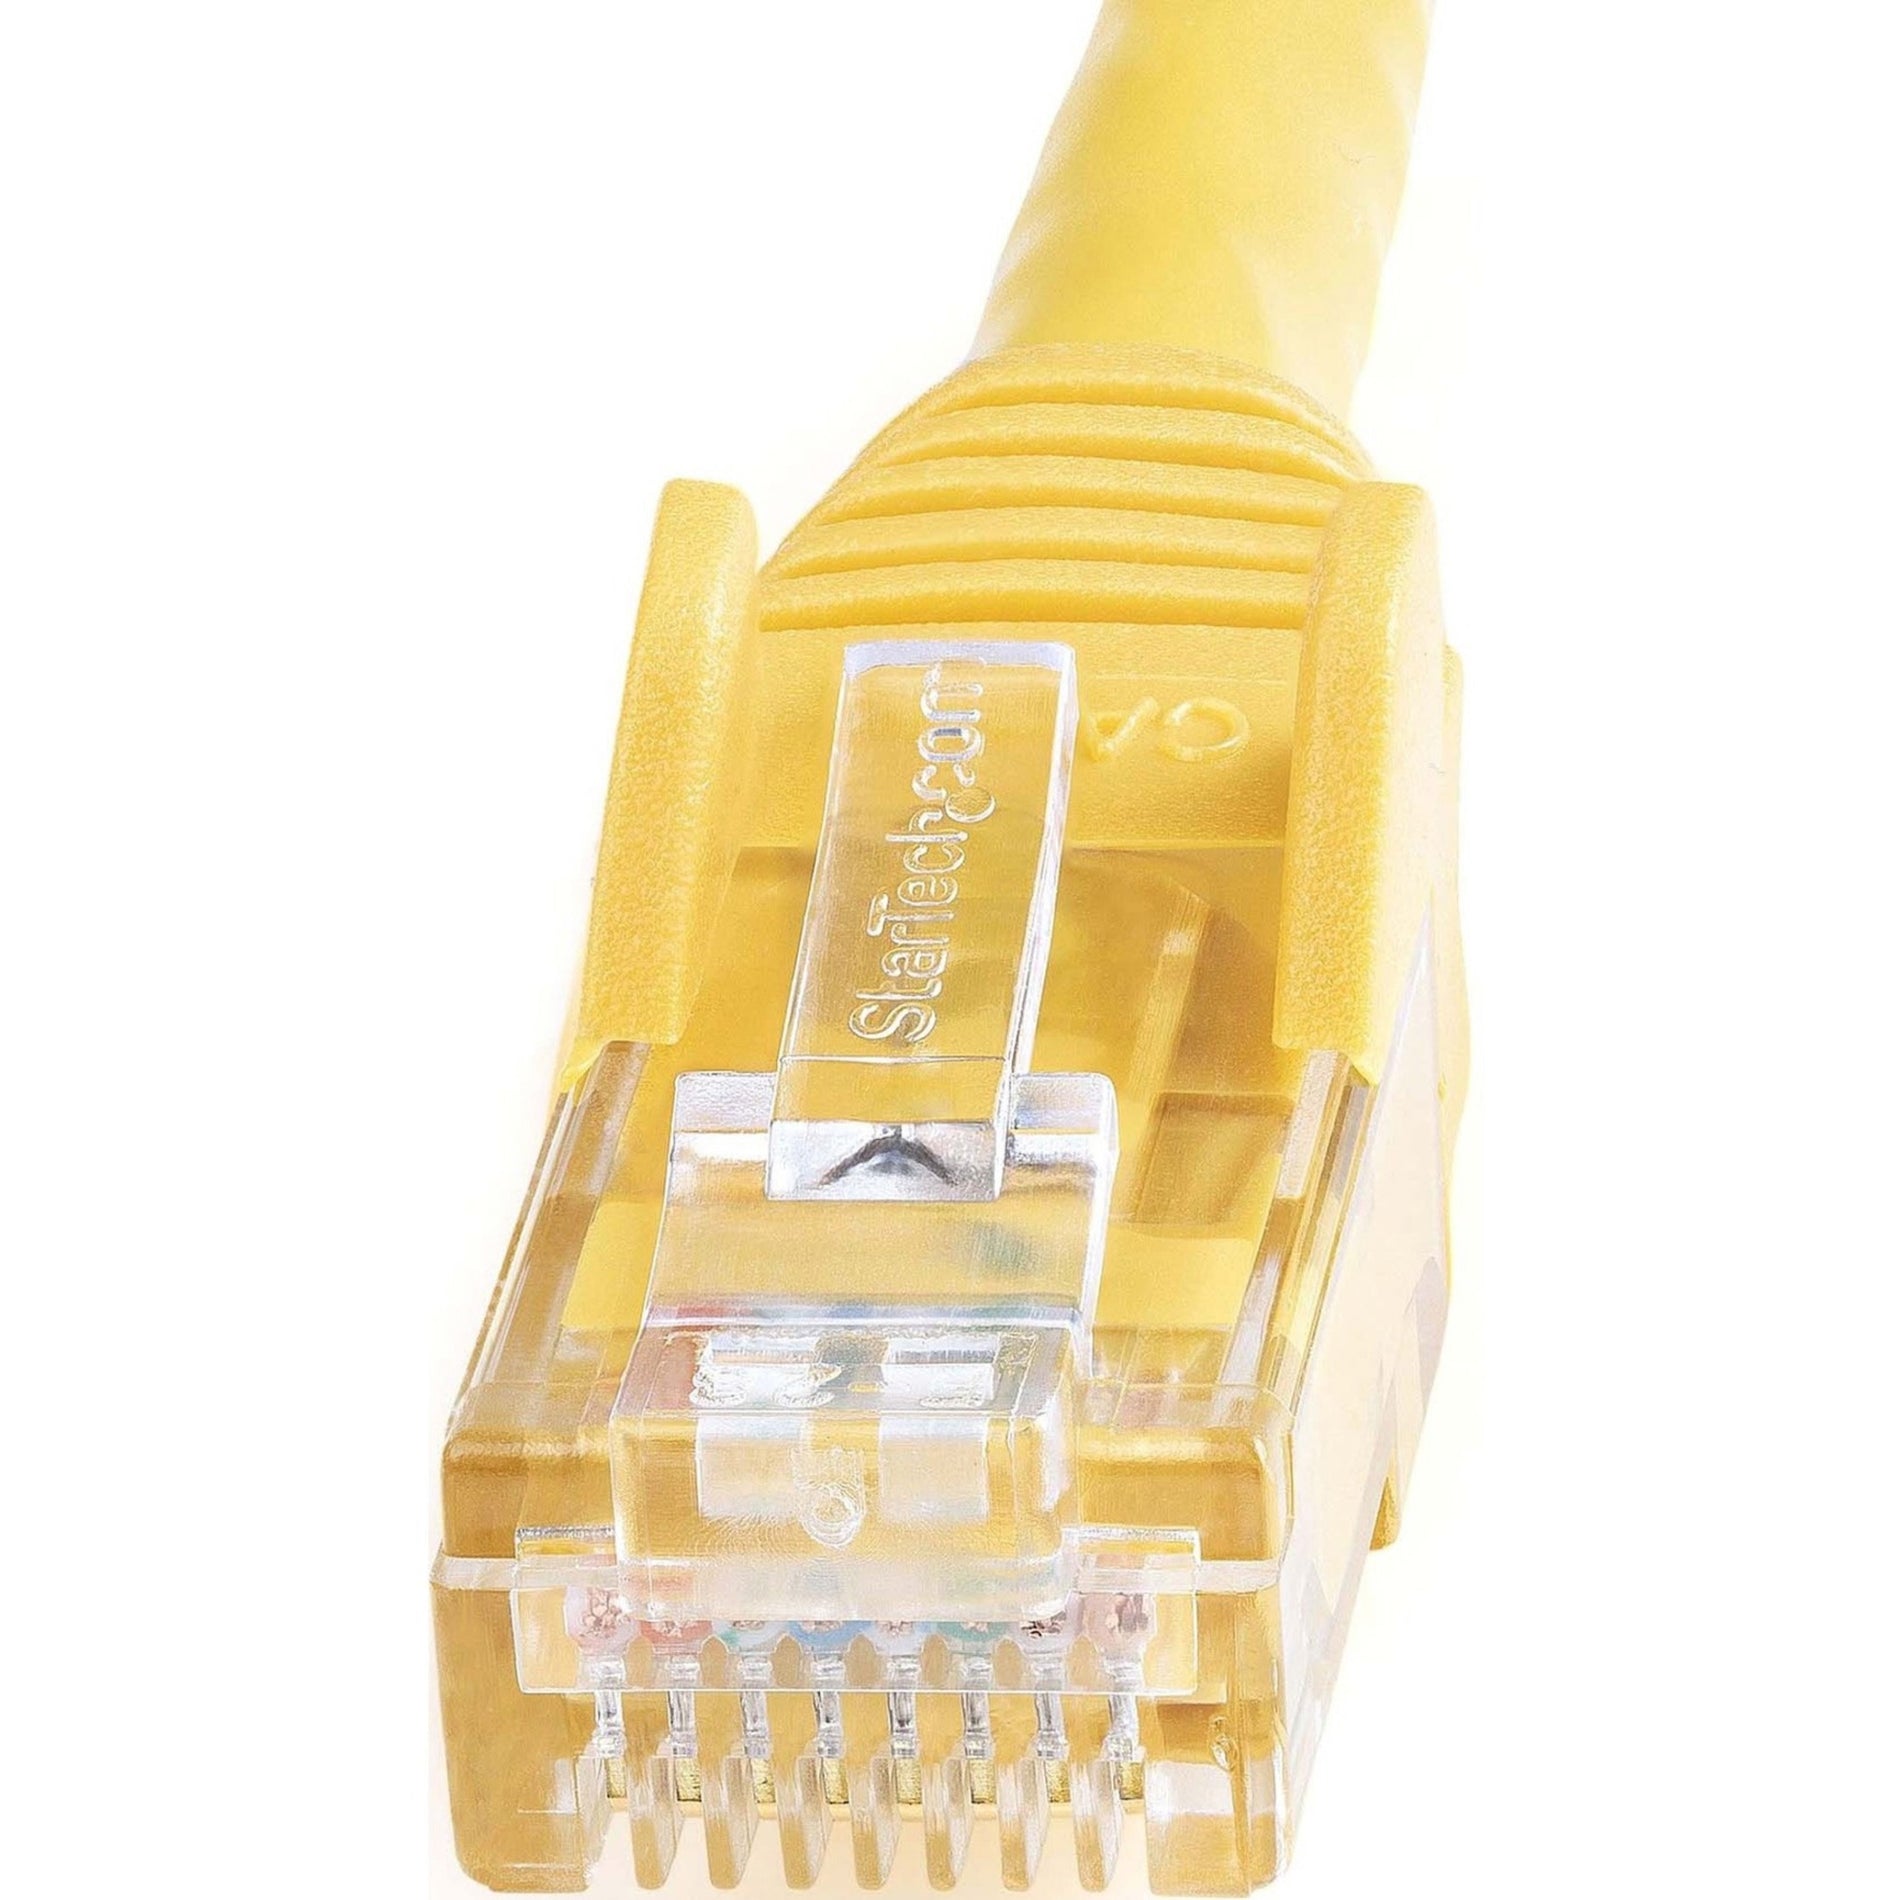 StarTech.com N6PATCH8YL Cat6 Patch Cable, 8 ft Yellow Ethernet Cable with Snagless RJ45 Connectors